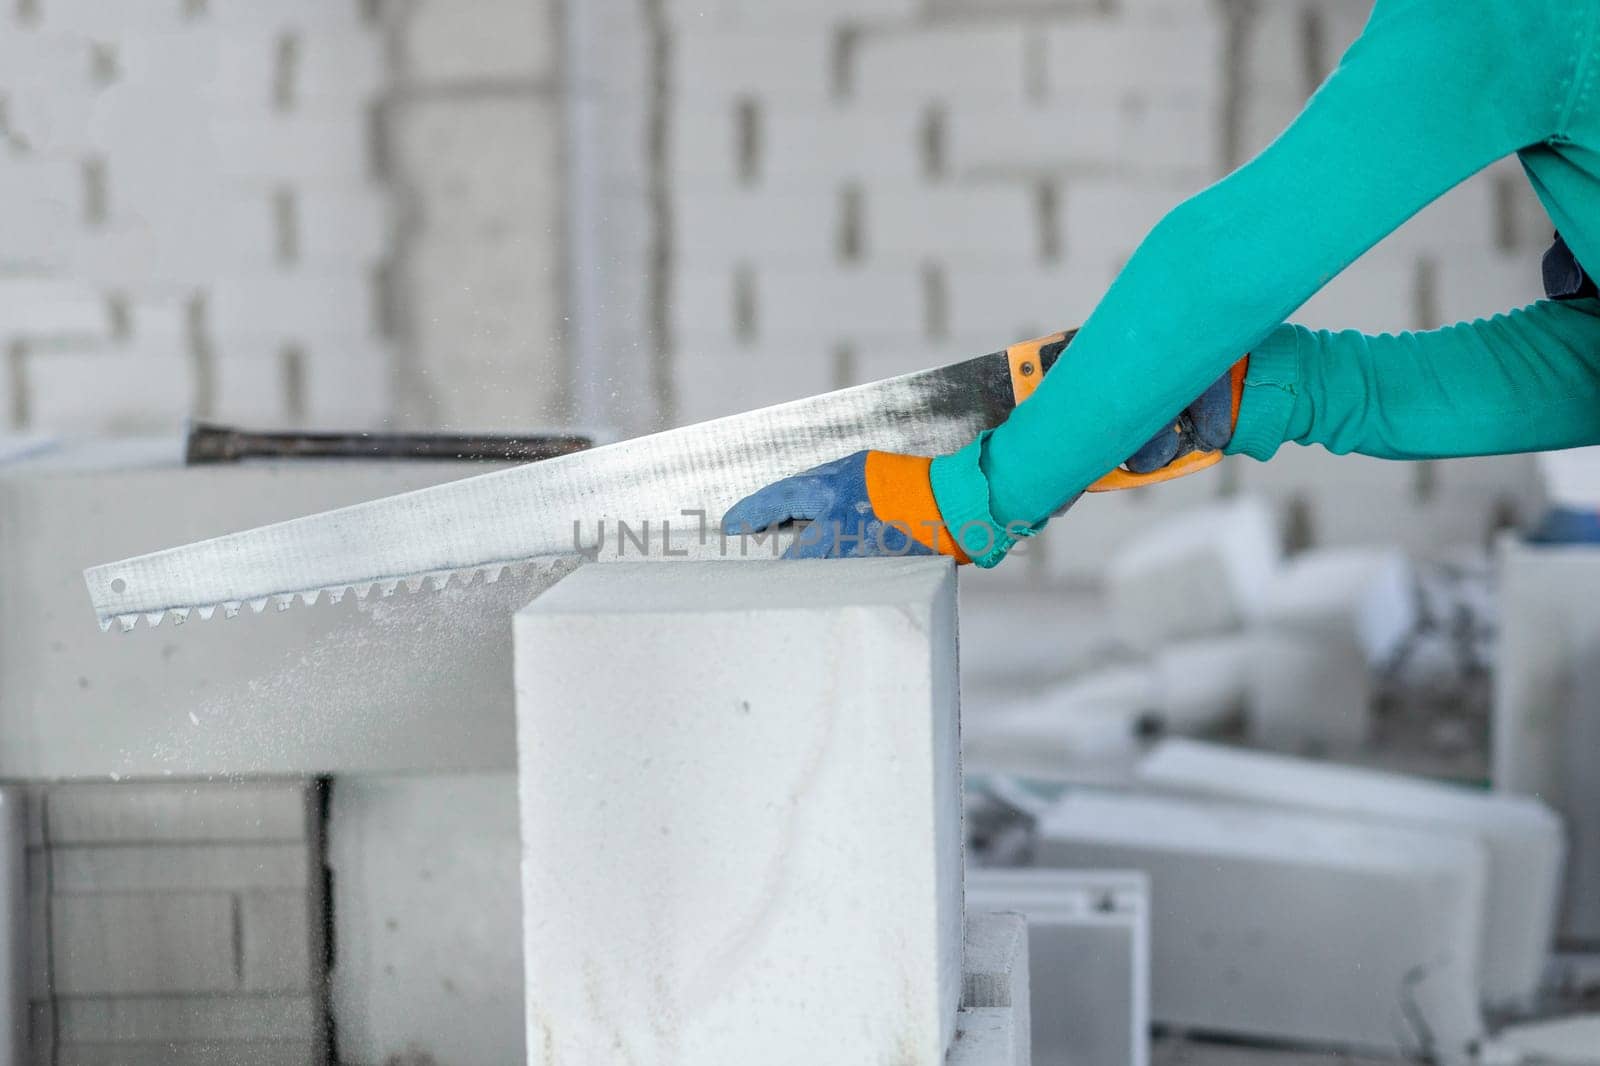 Sawing an autoclaved aerated gas block with a hand saw at a construction site during the construction of internal partitions of a building by Rom4ek